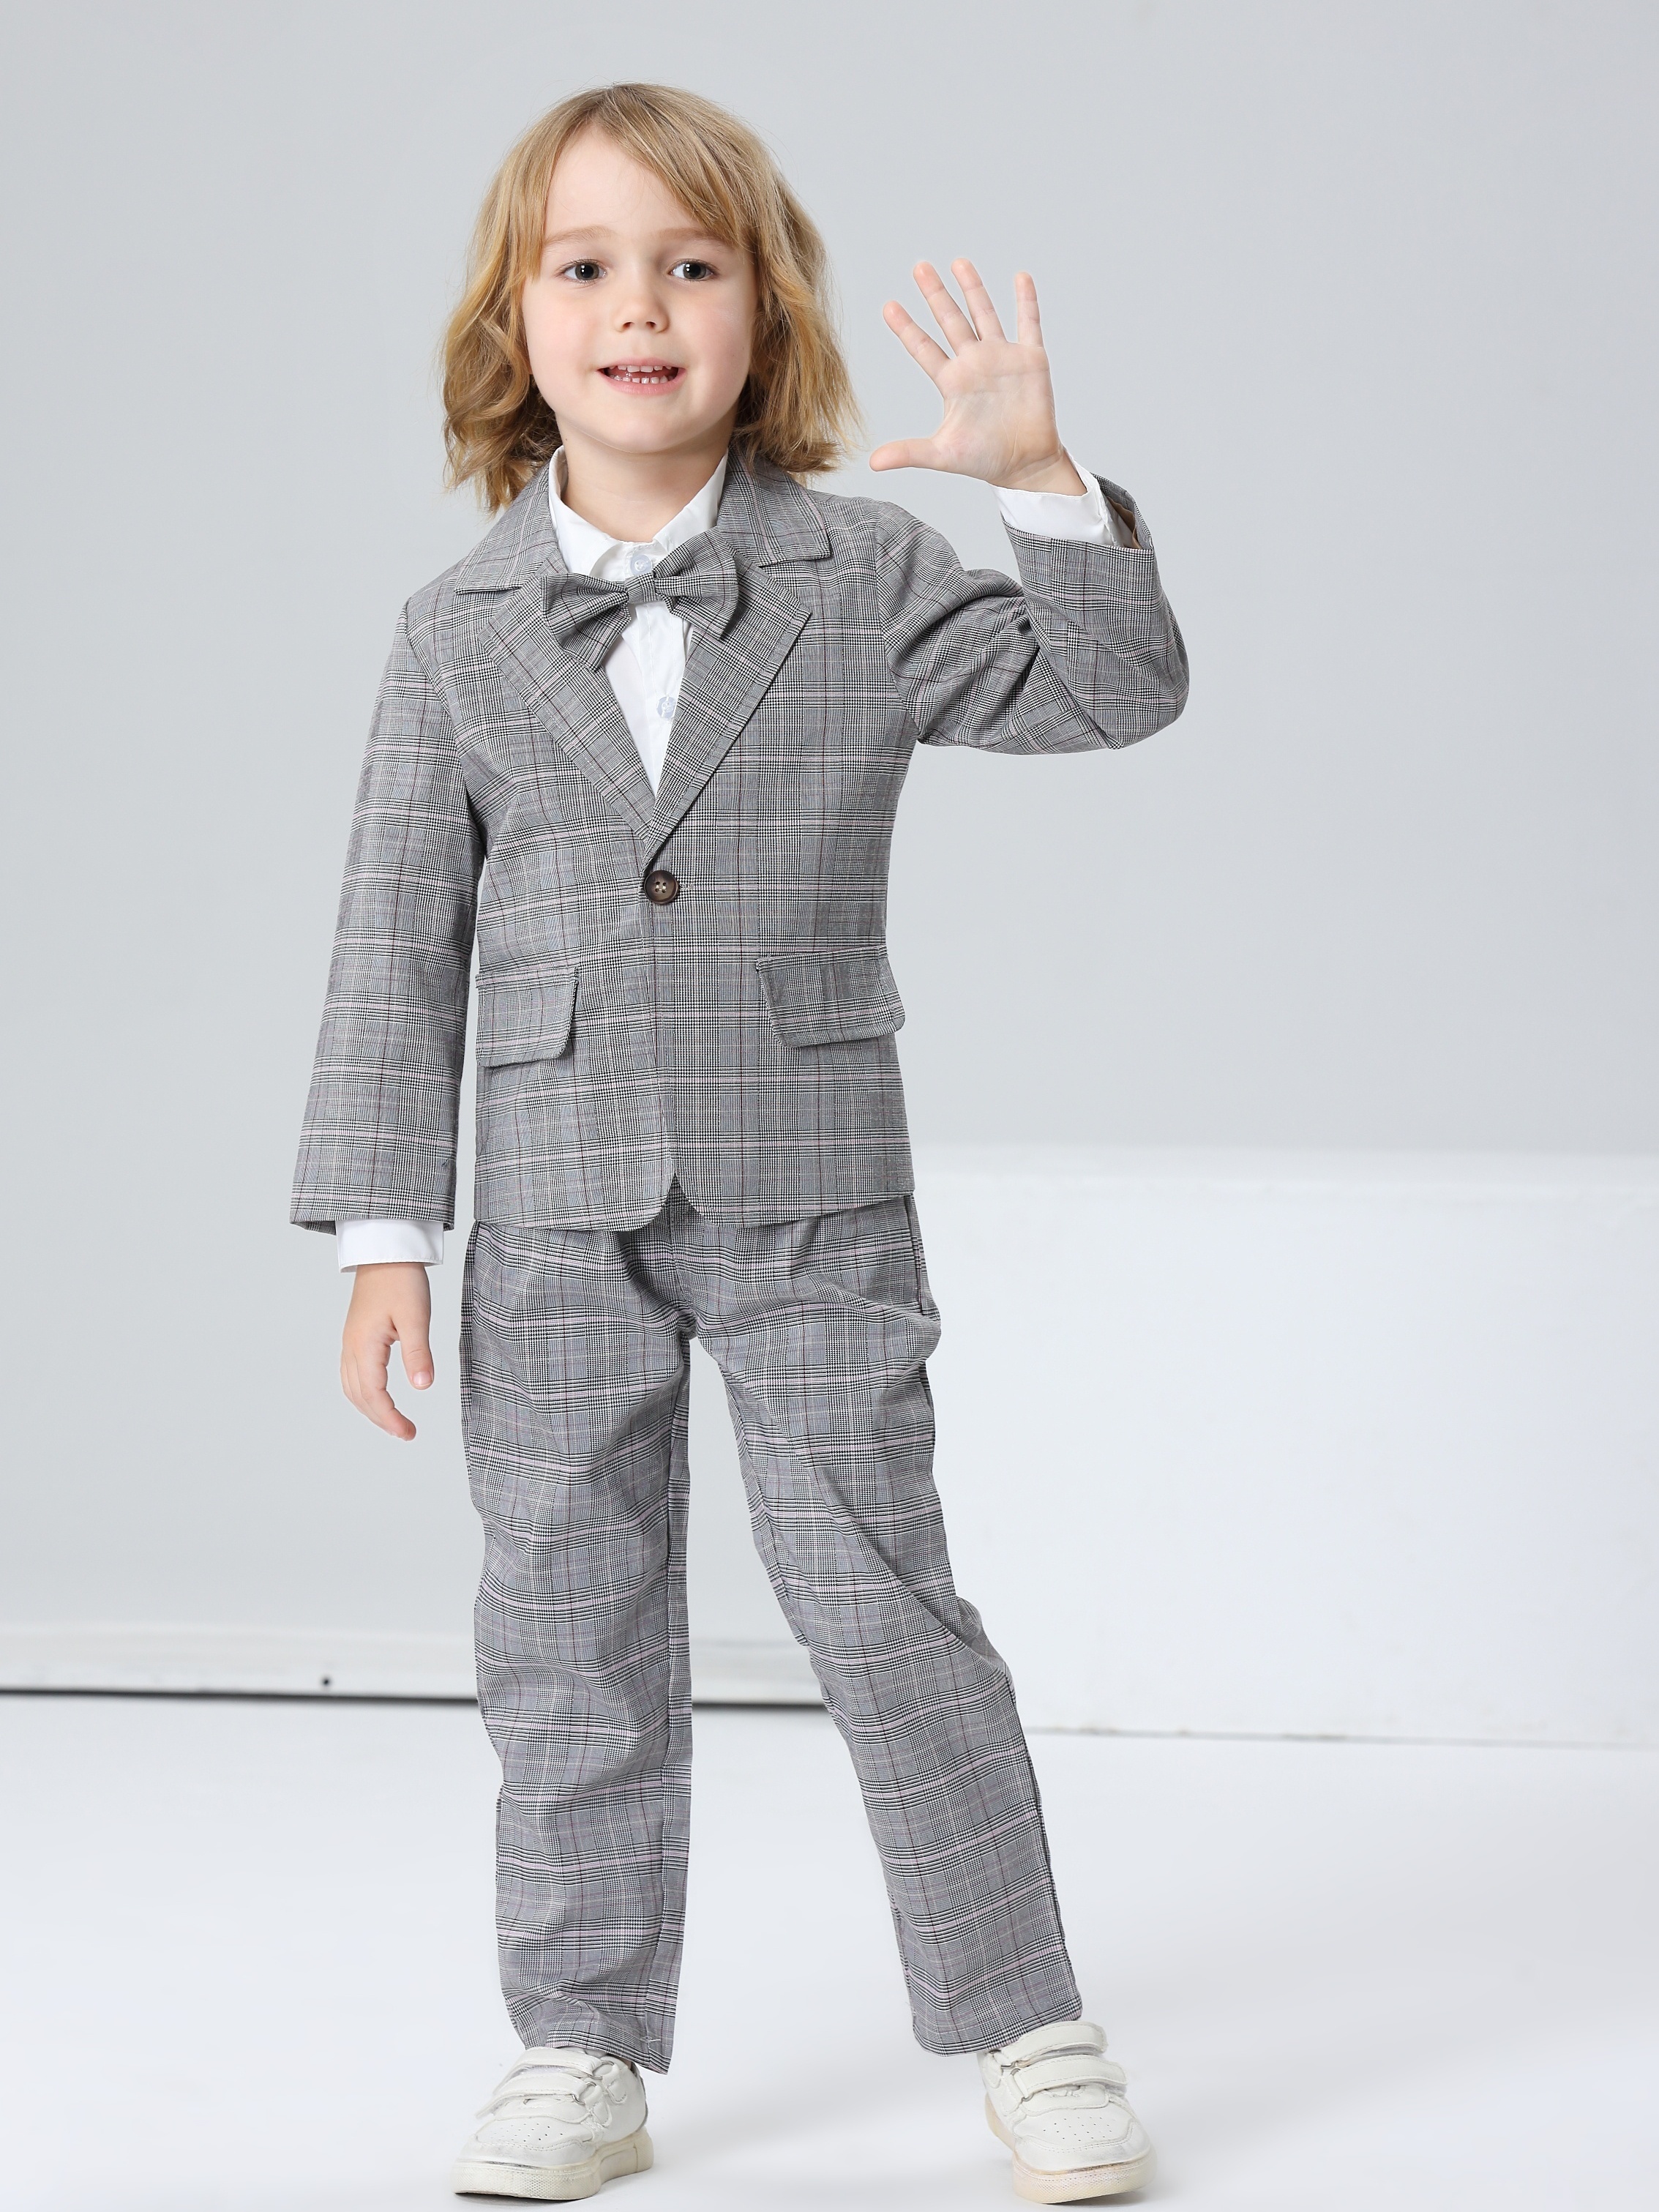 Toddler Baby Boy Handsome Gentleman Suit 3pcs Long-sleeved Shirt With Bow  Tie Plaid Blazer And Pants, Stylish & Romantic For Birthday Parties,  Evening